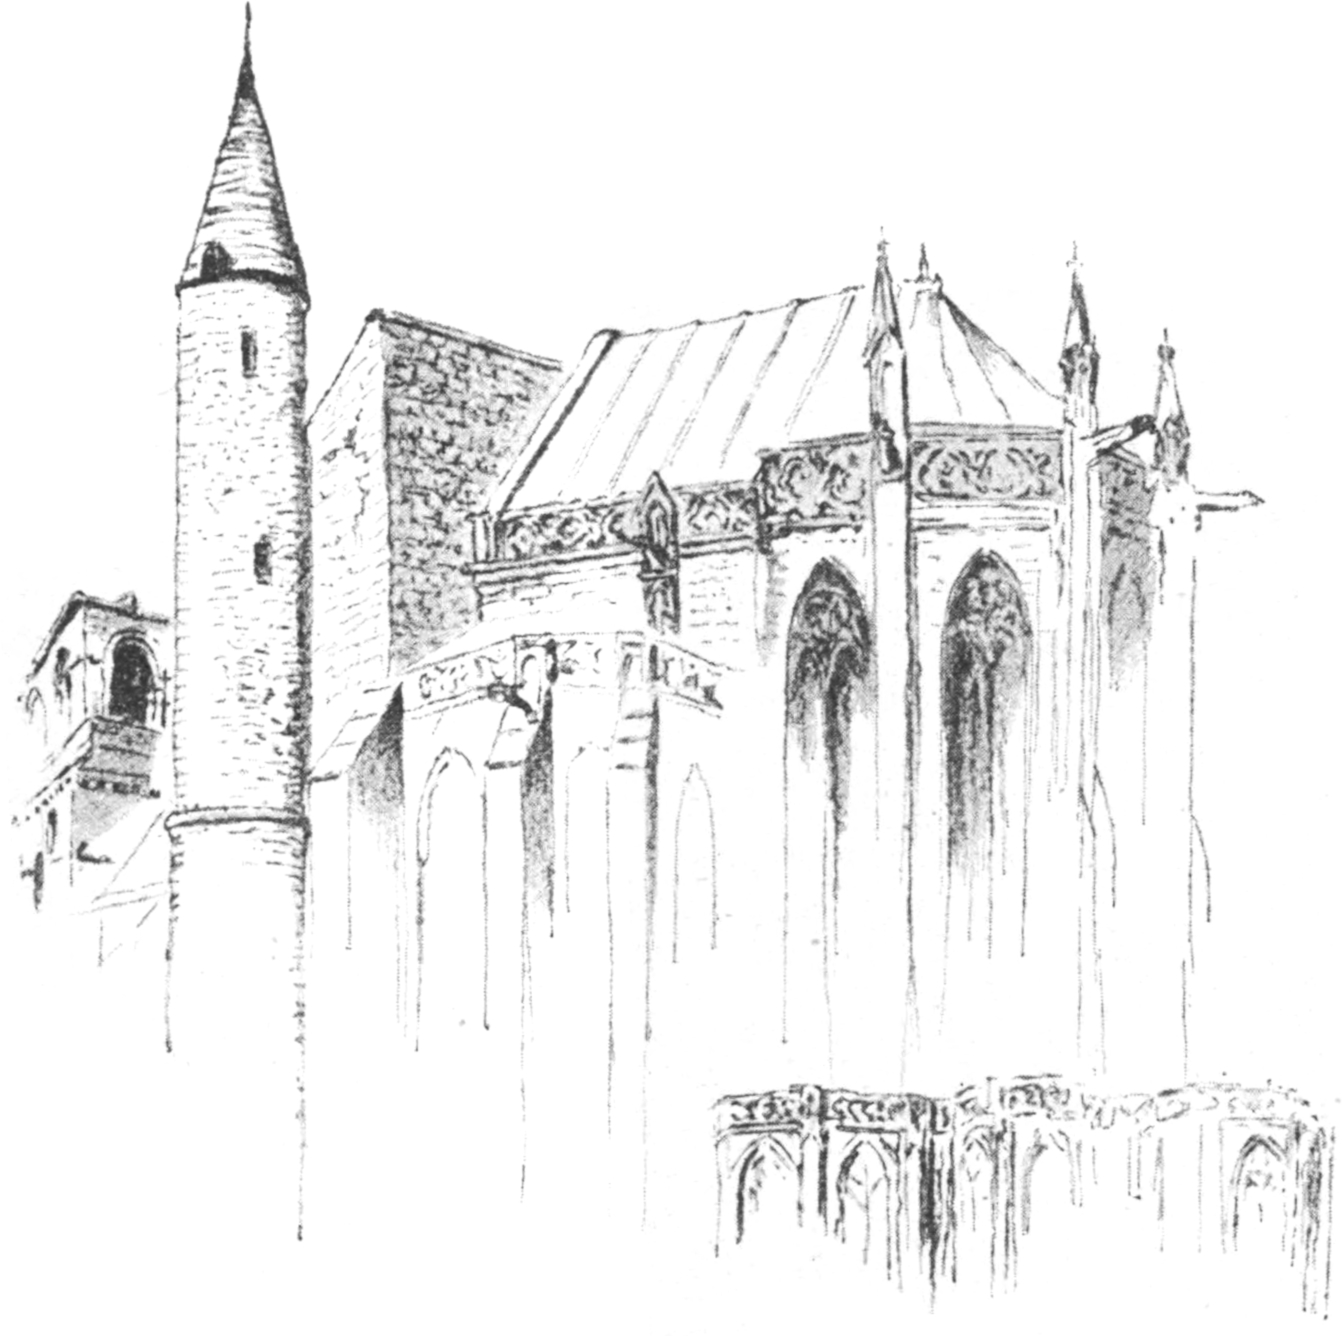 Sketch of a church, with a stone tower to the left and decorated pillars and apse to the right.